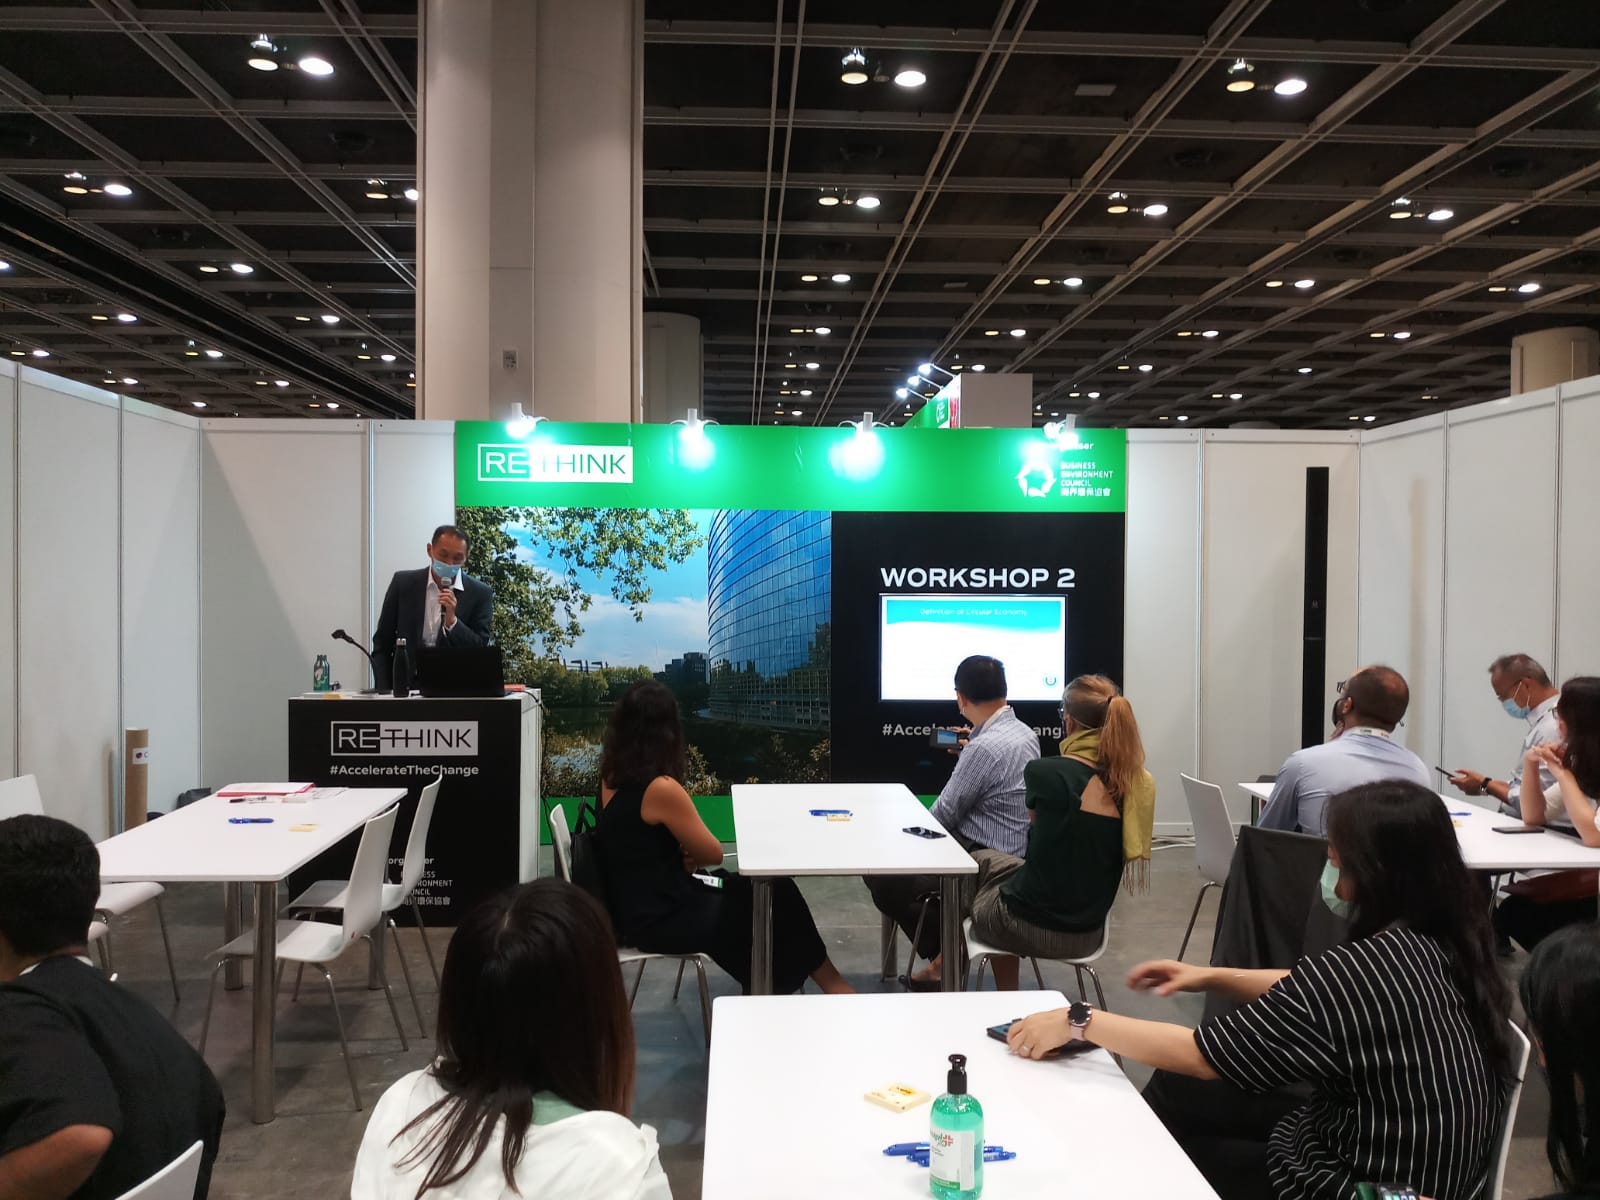 A Good Start for Promoting Circular Economy in Hong Kong